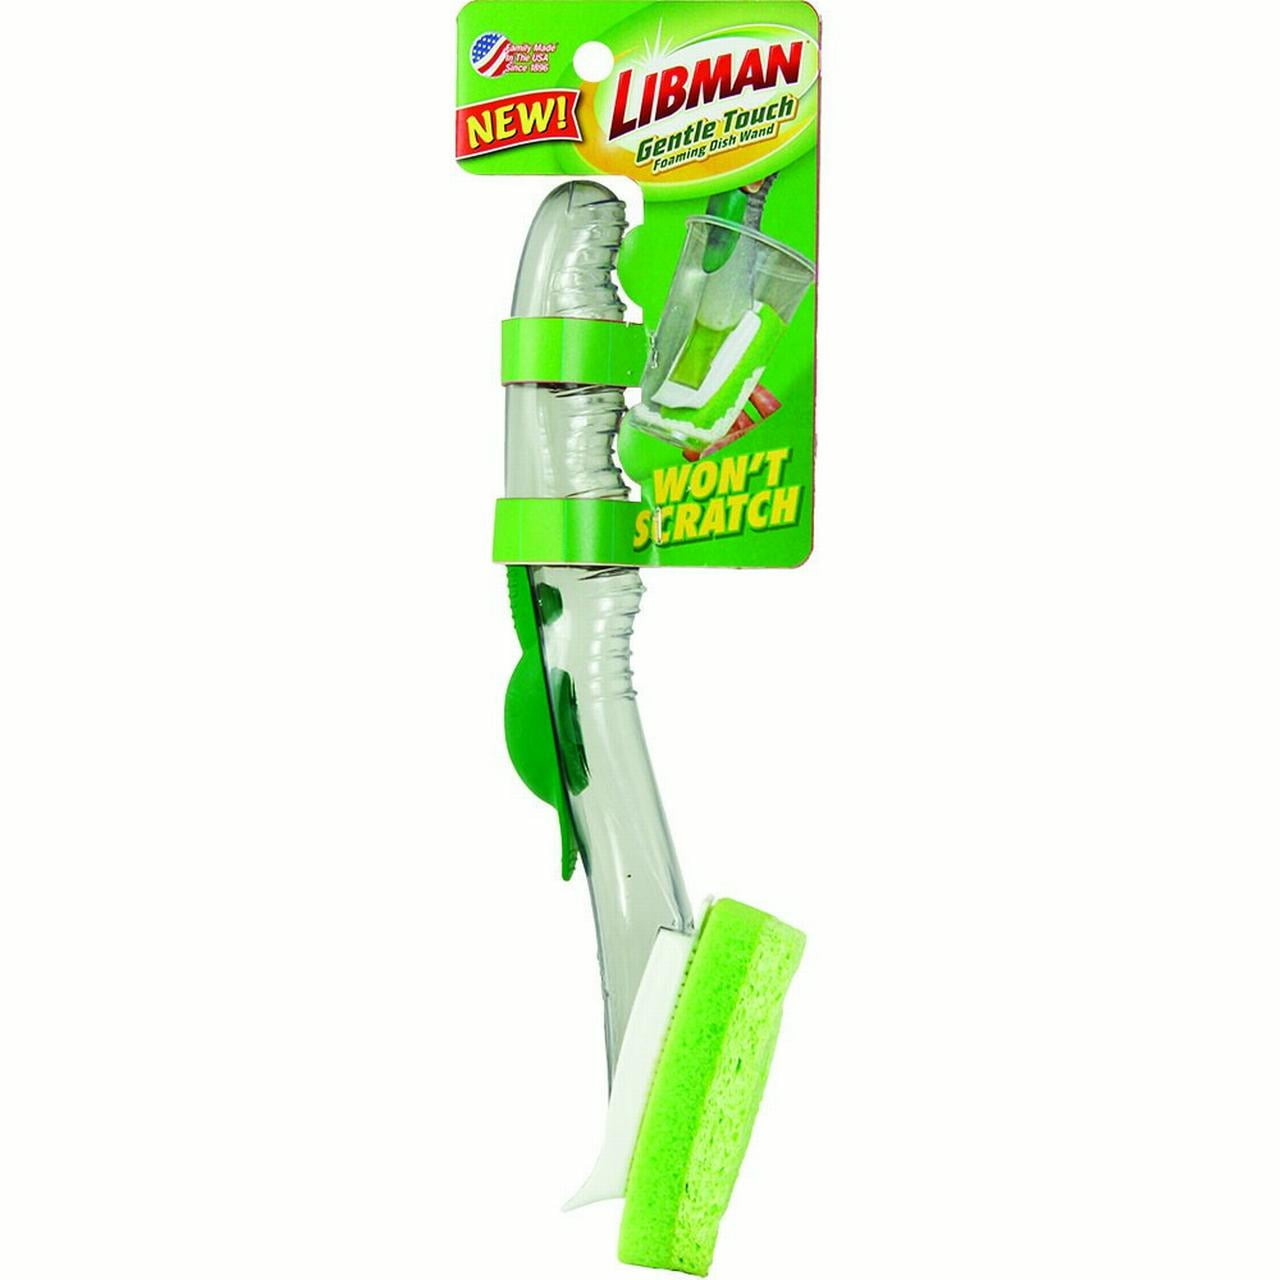 Buy Libman Gentle Touch Foaming Dish Wand Refill